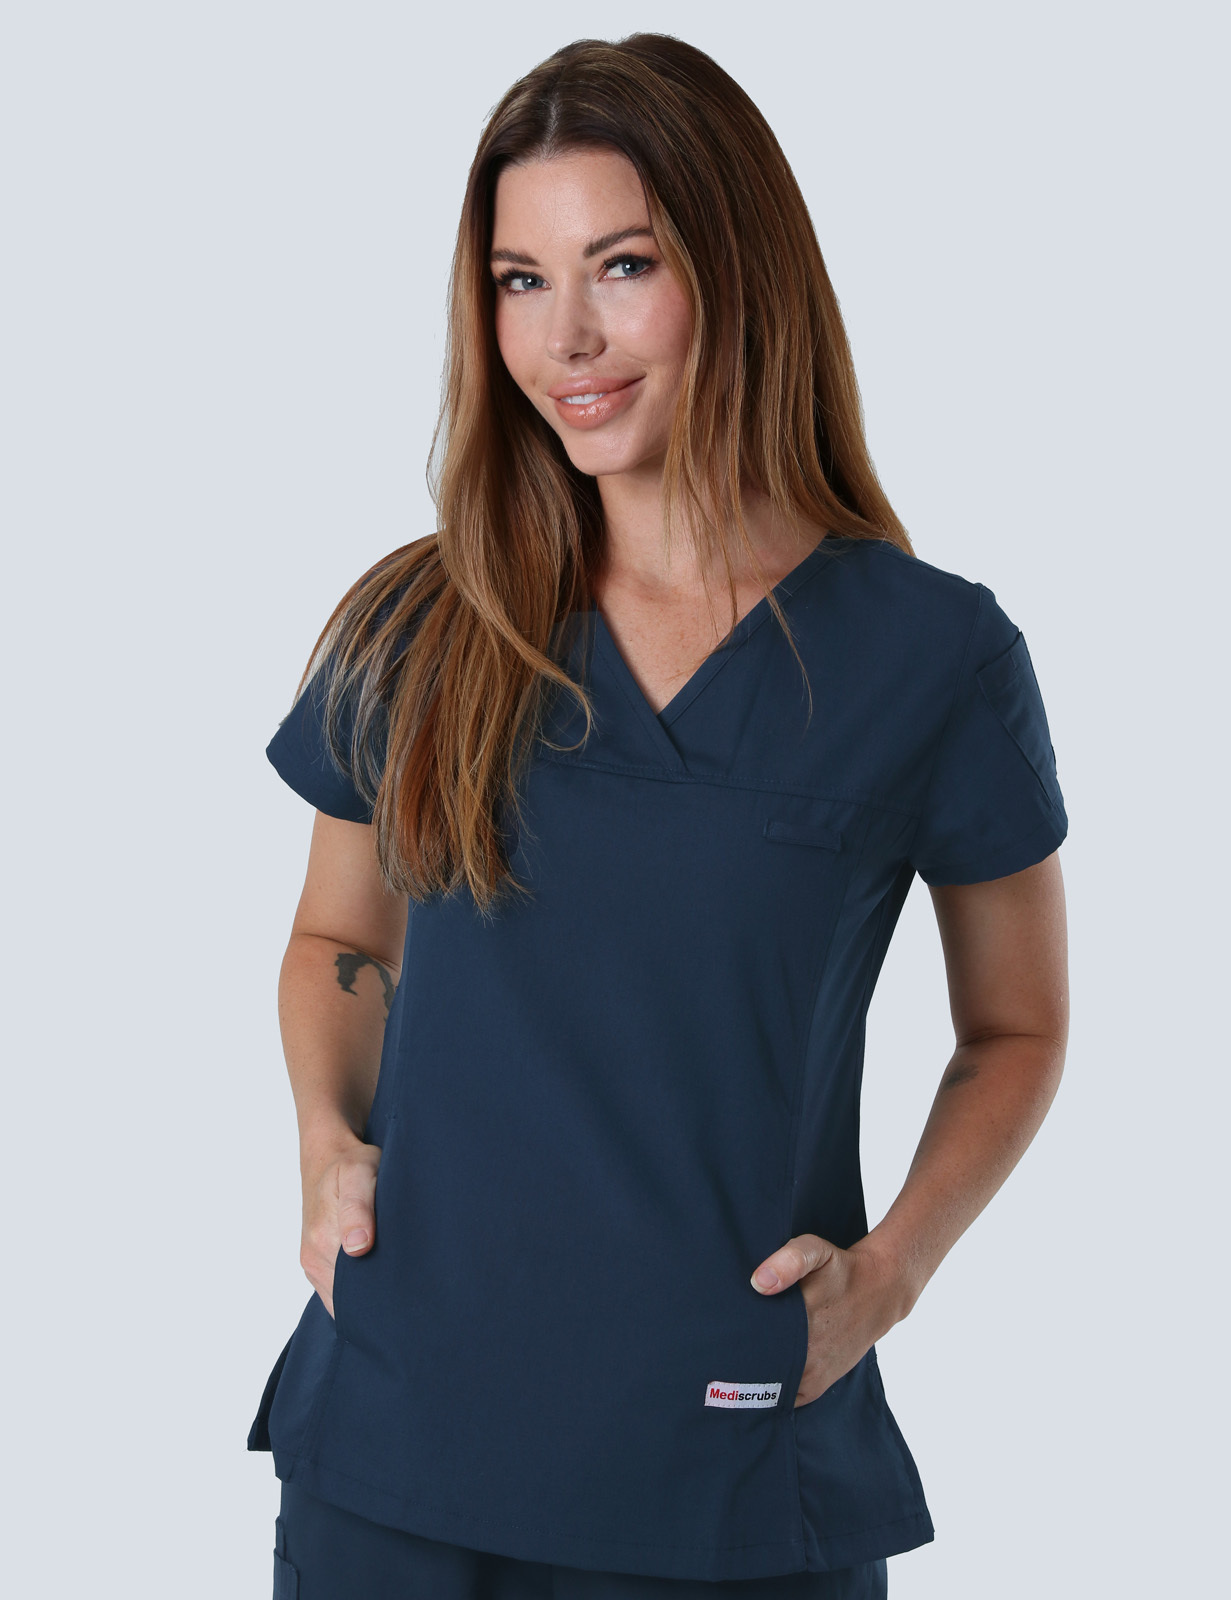 Weipa Hospital - ED CN (Women's Fit Solid Scrub Top and Cargo Pants in Navy incl Logos)